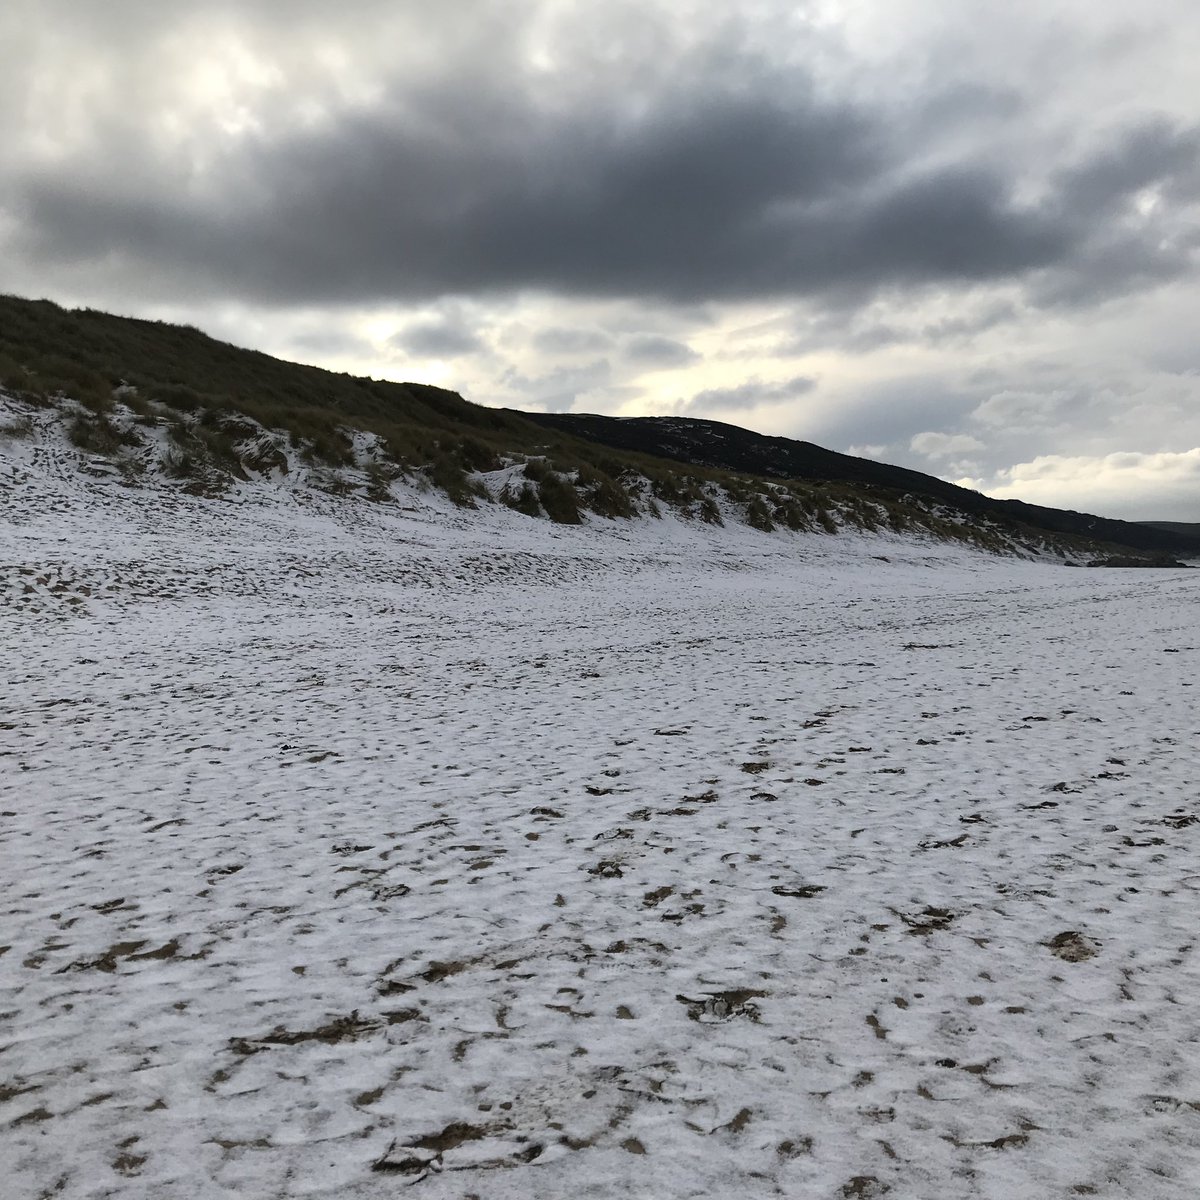 Quite a cold walk on Woolacombe Beach today (wind was bitter). 
Two small footpaths included - Mortehoe 19 & Mortehoe 7.